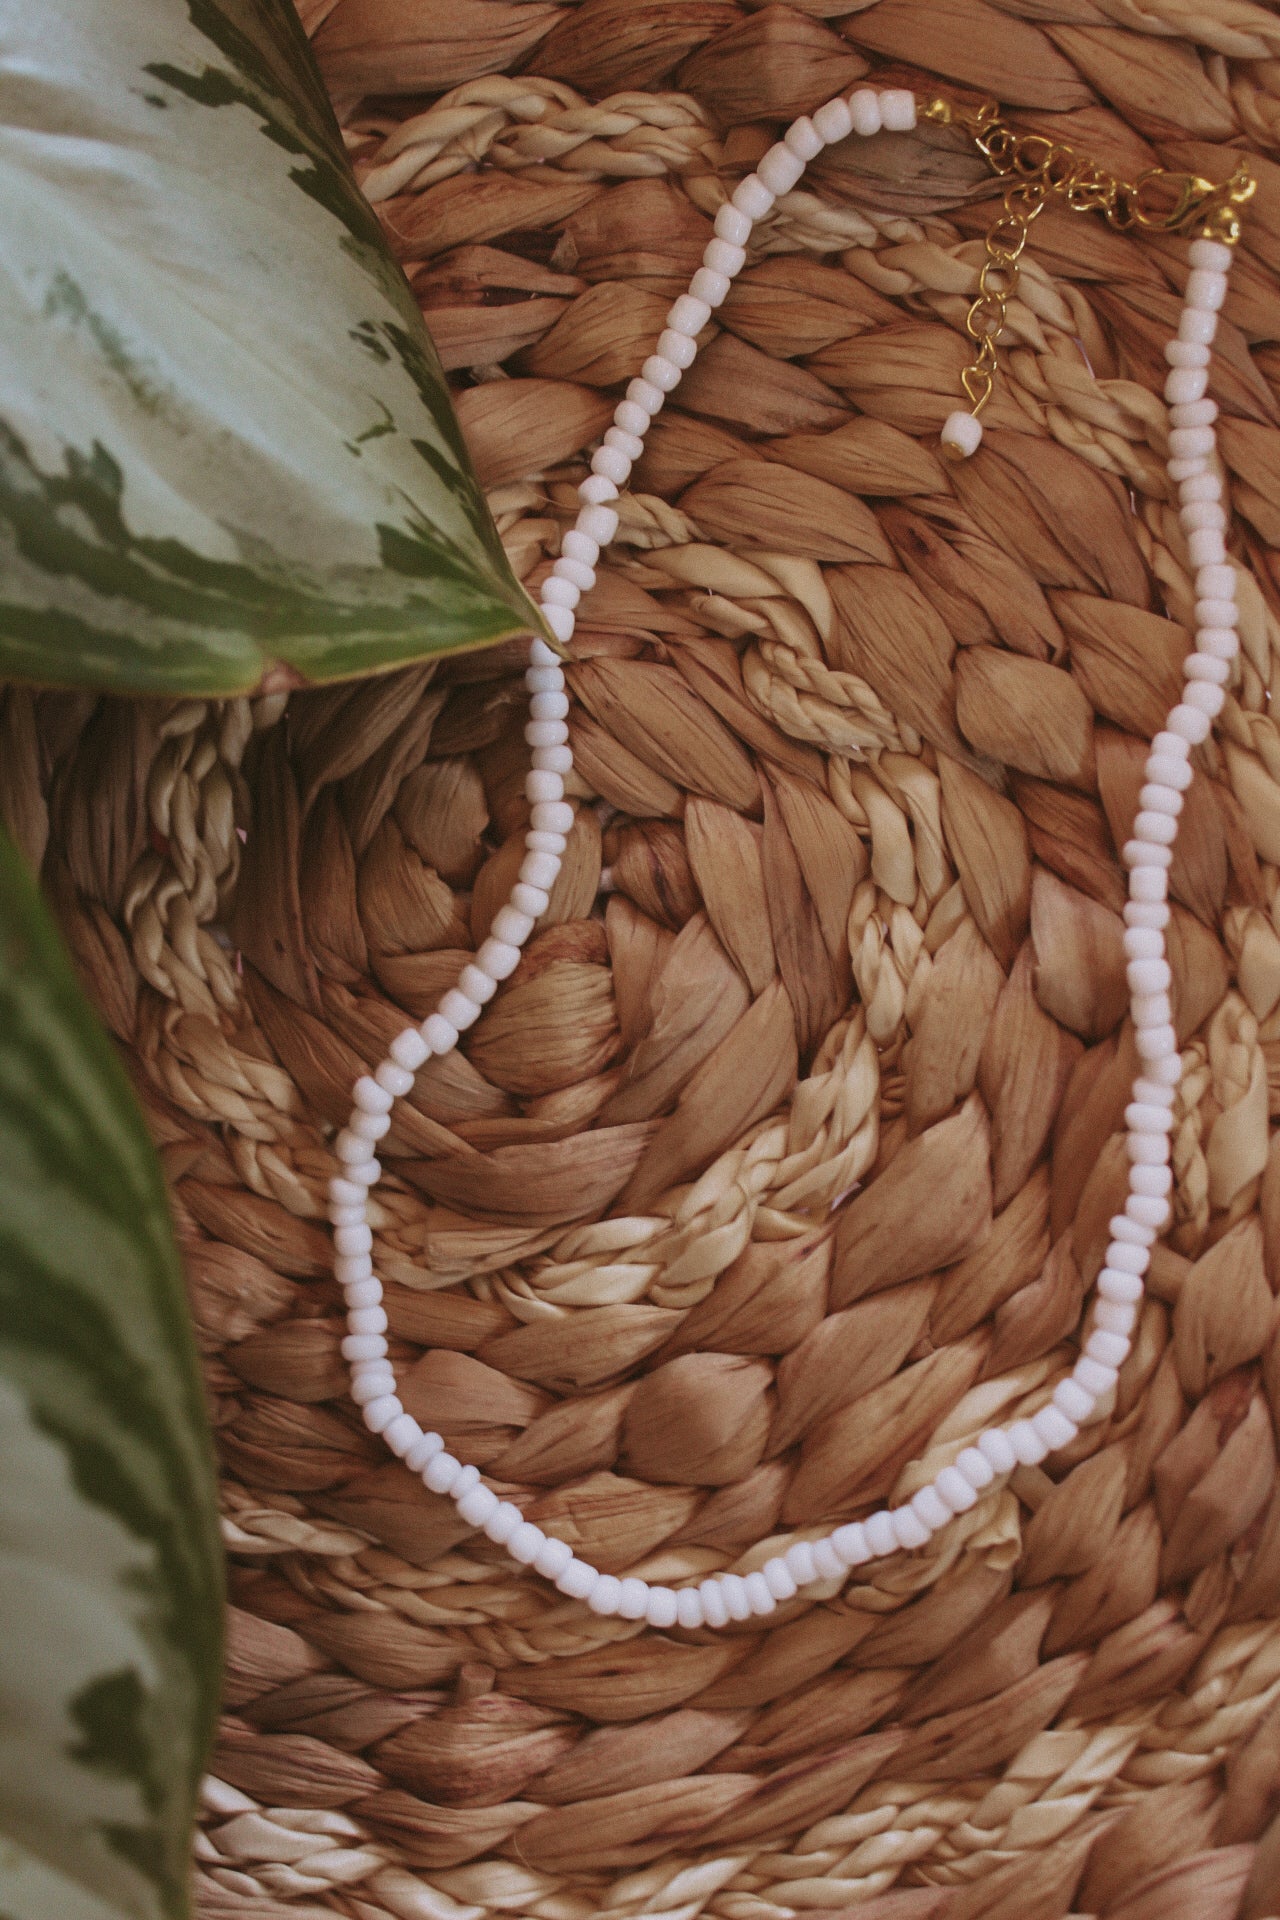 Essential Seed Bead Choker Necklace